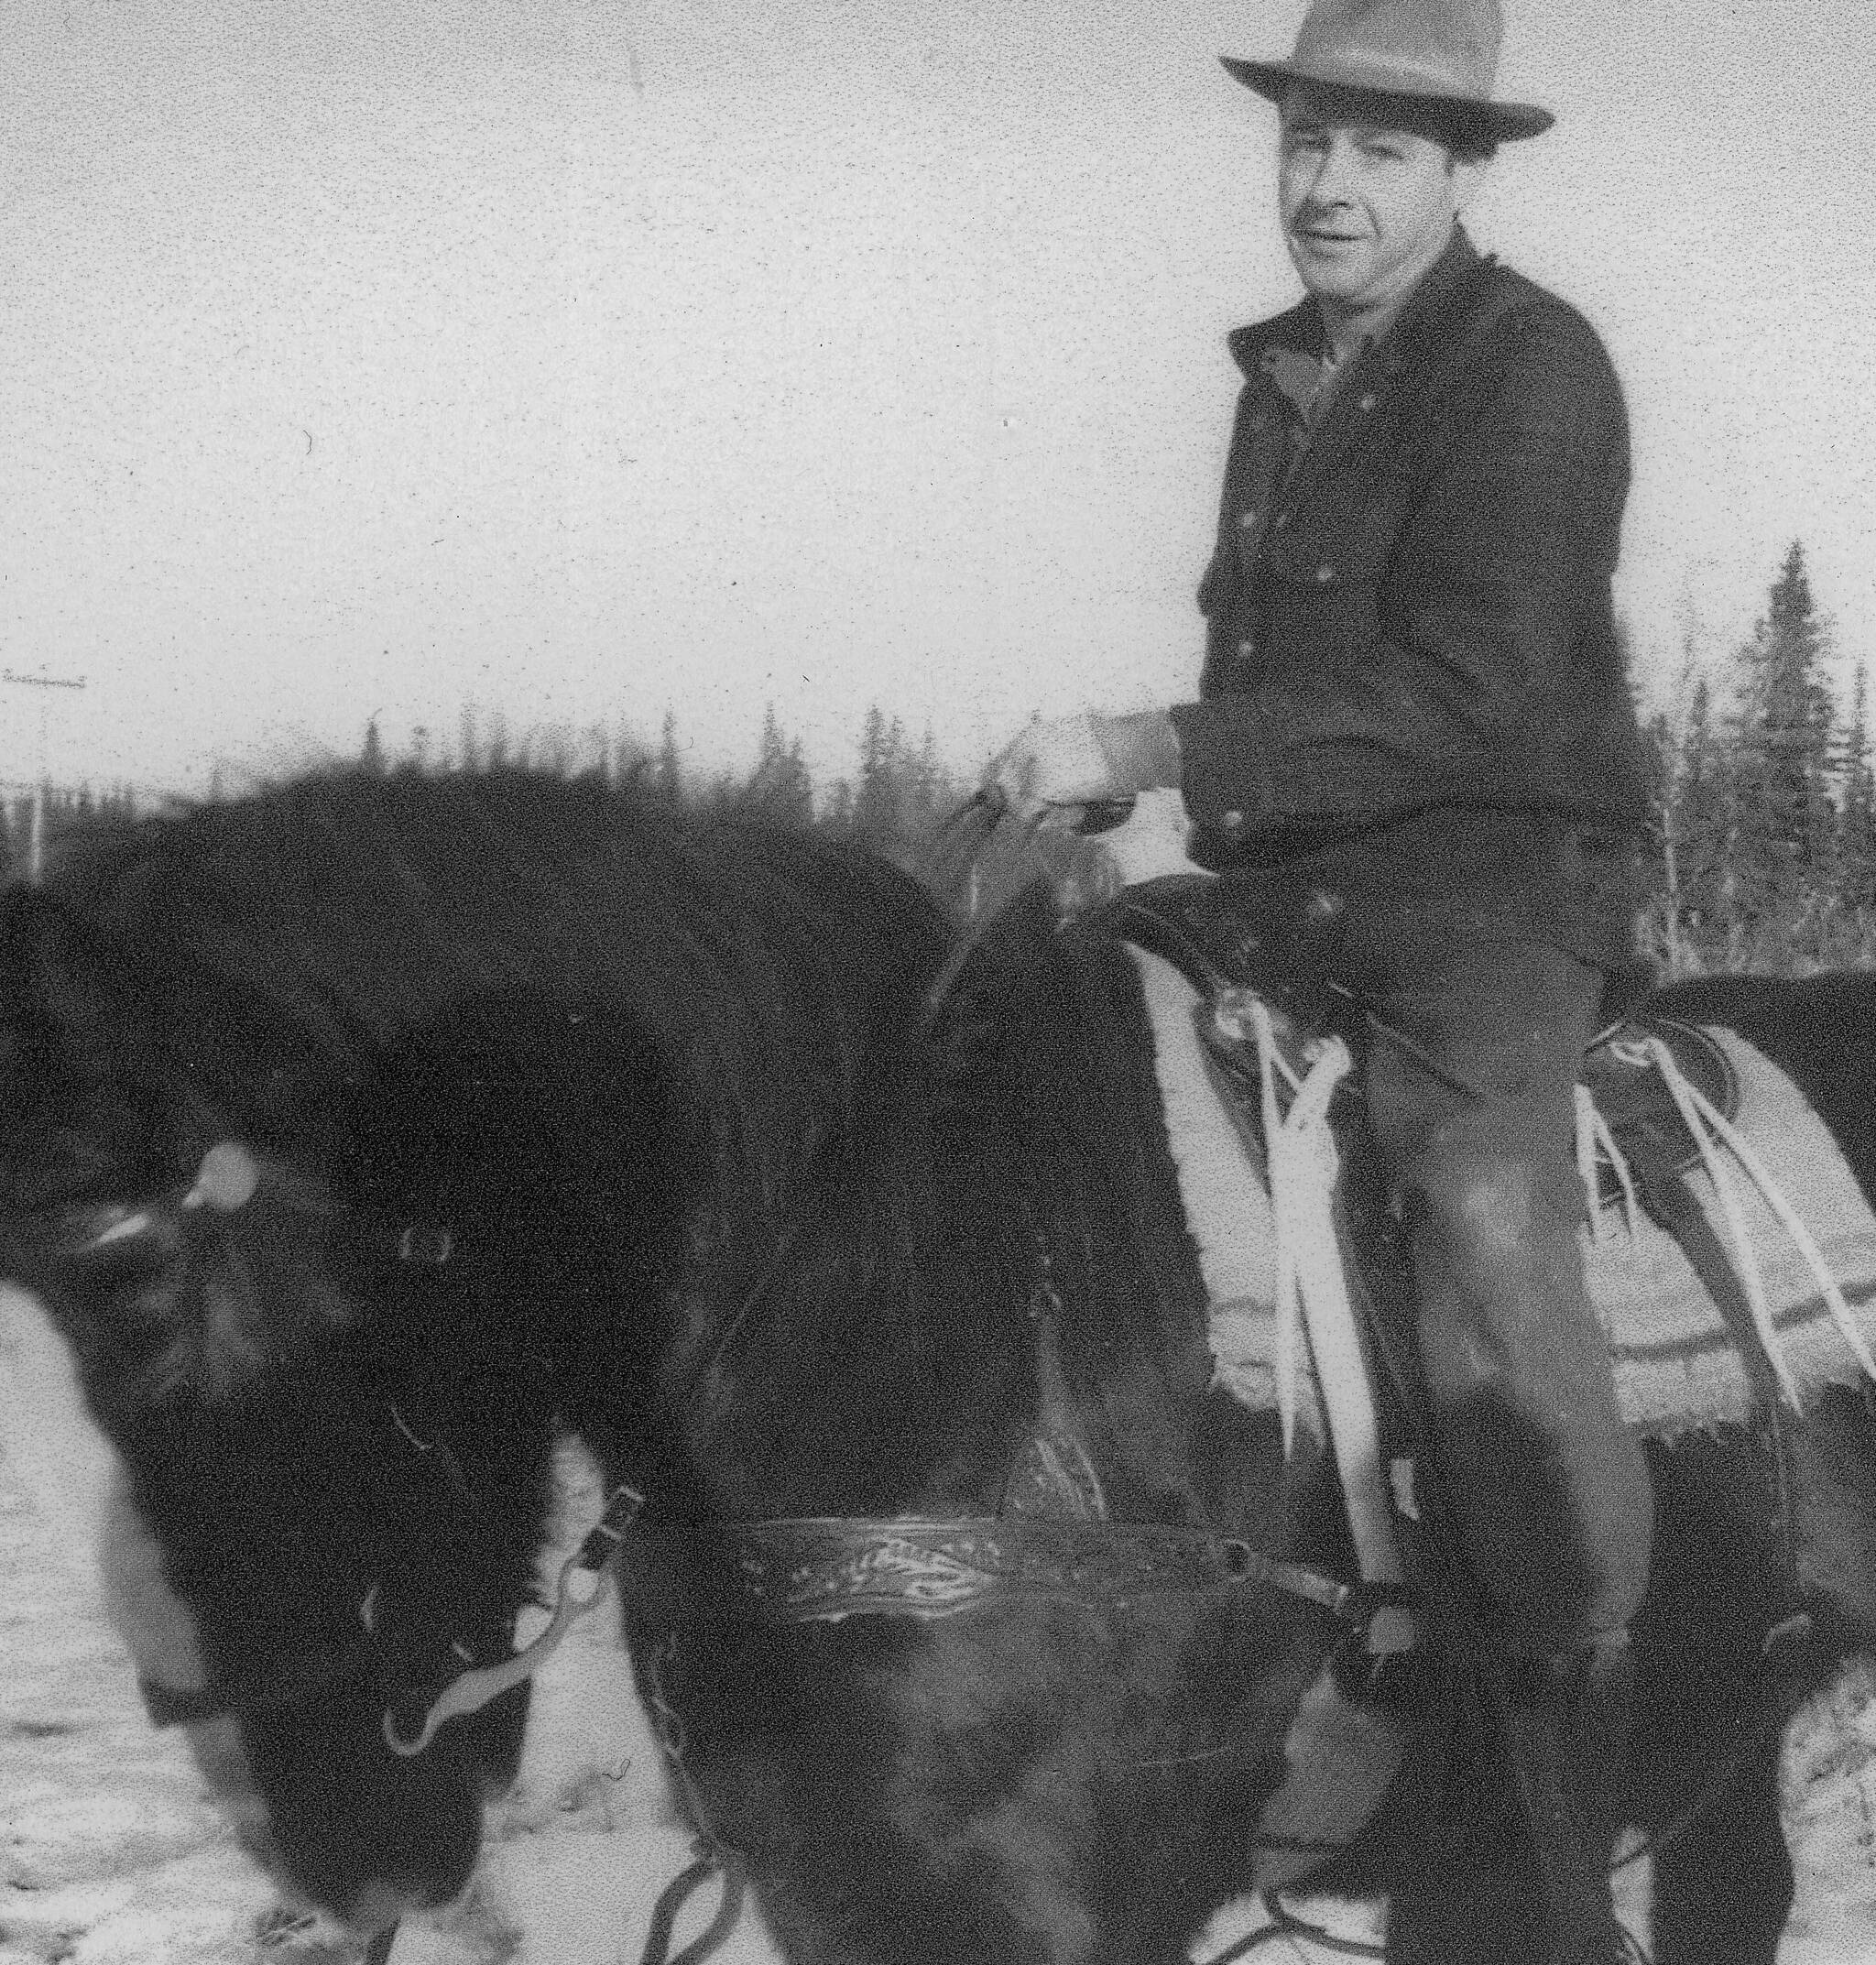 Photo courtesy of the Lancashire Family Collection
Larry Lancashire on horseback, probably on the family homestead.